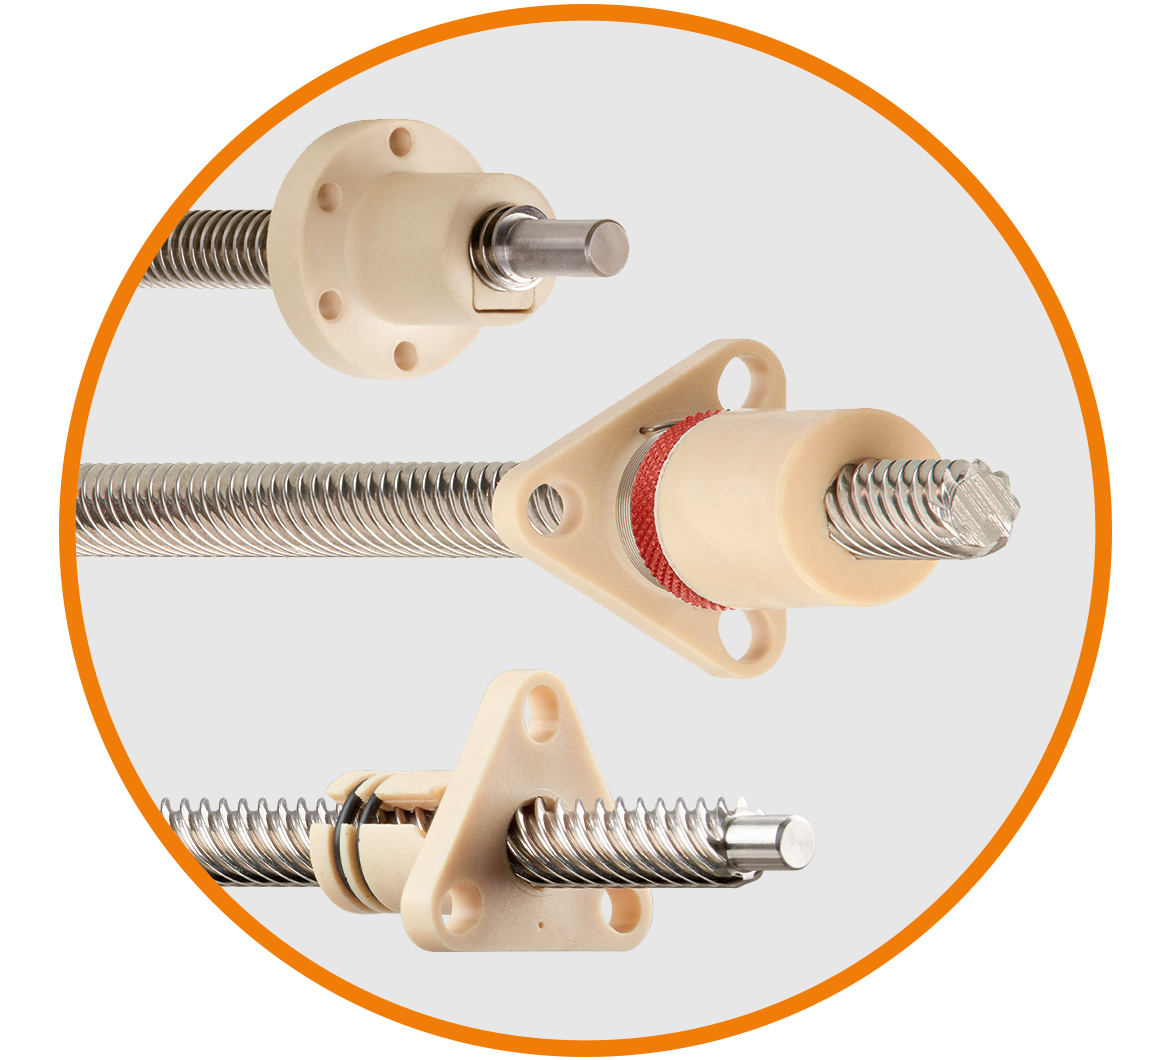 3 lead screws each with a different lead screw nut